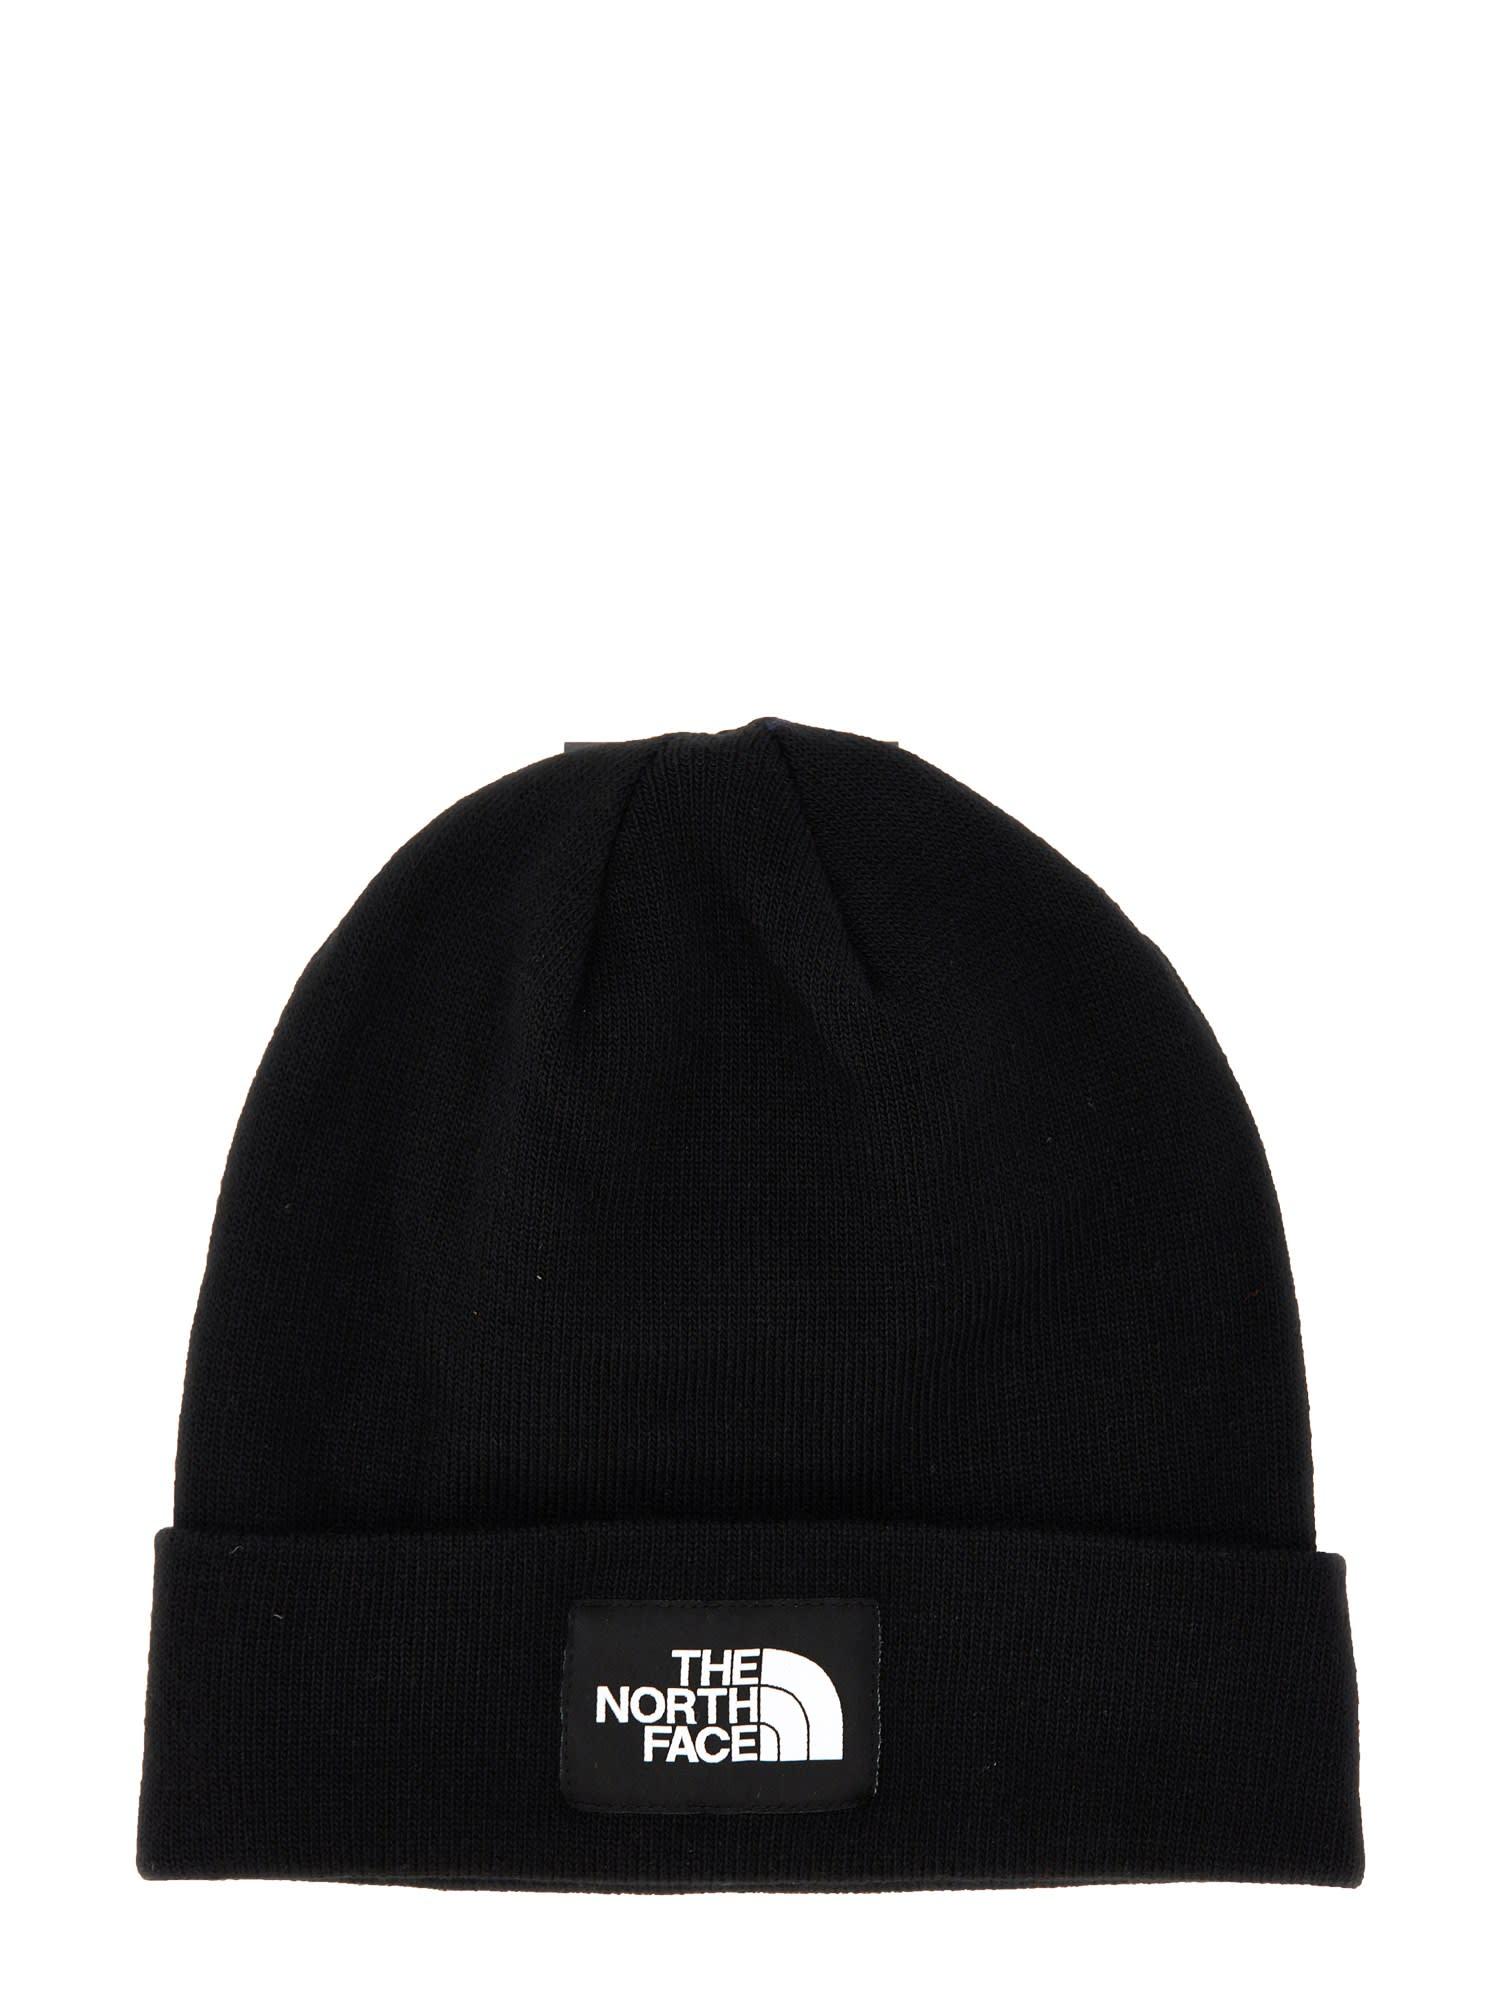 The North Face Beanie Hat in Black for Men | Lyst